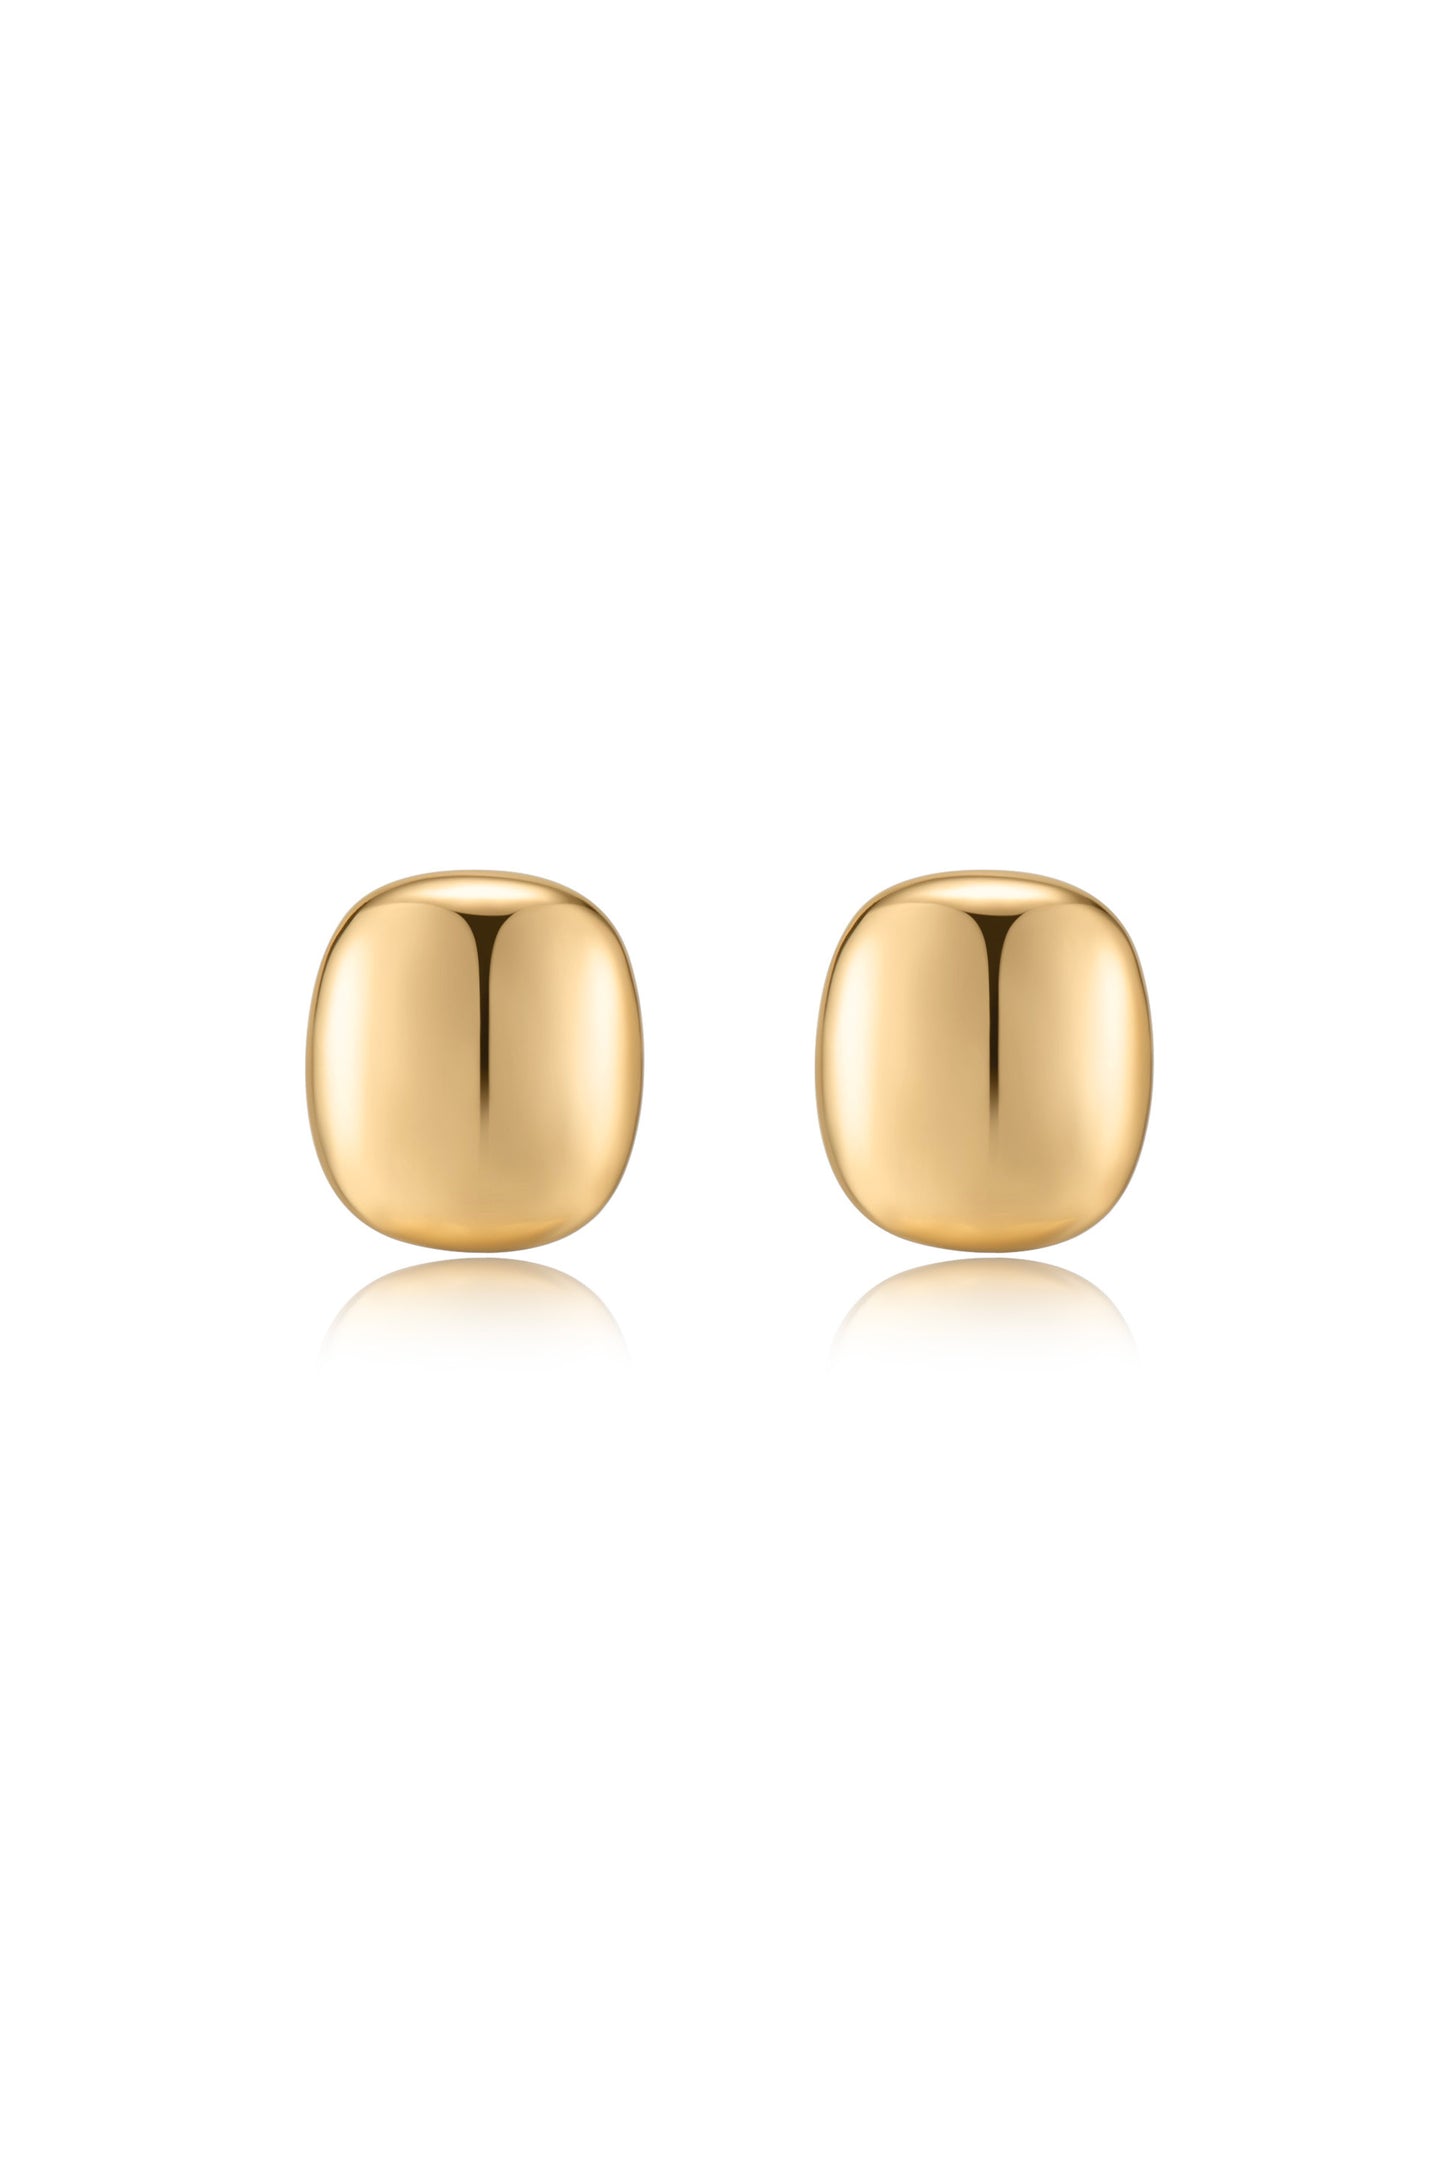 Minimal Curved Square Stud Earrings in gold